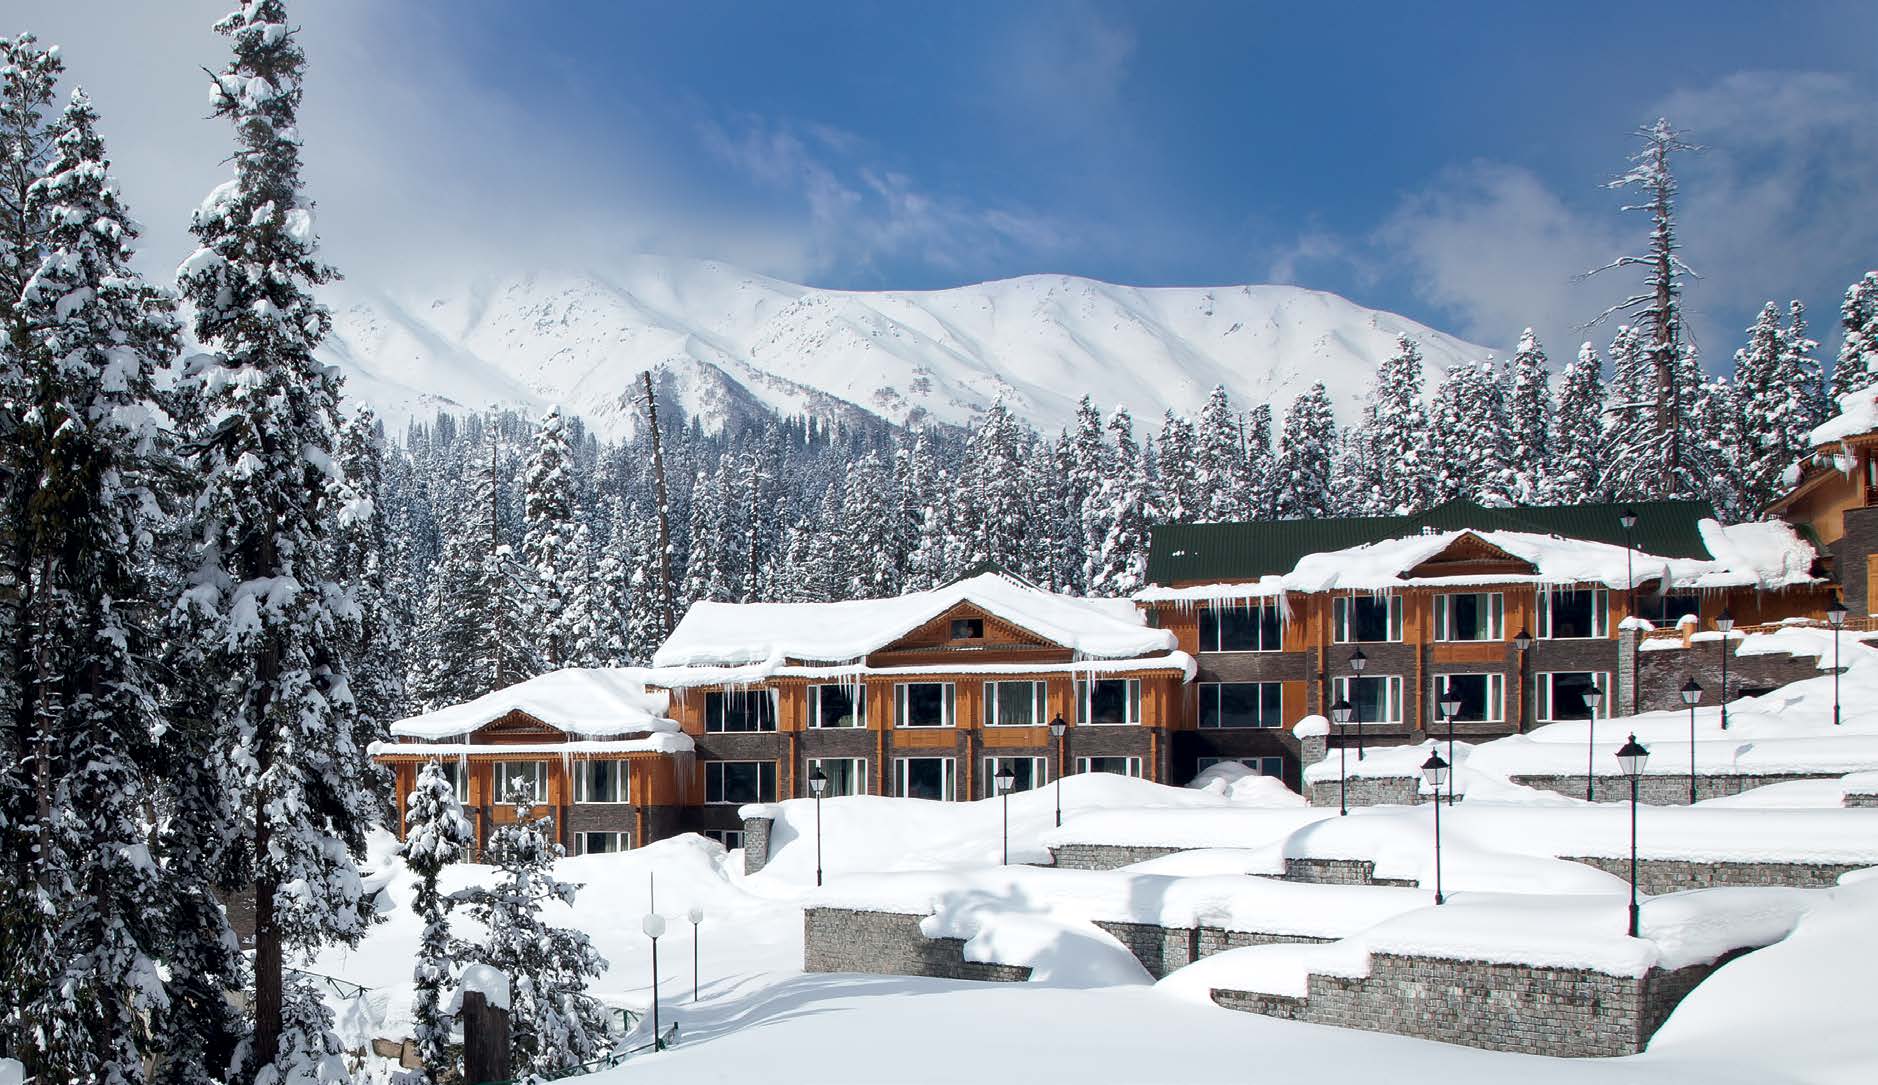 Kashmir's Winter Paradise Beckons: Tourists Flock to Valley's Snowy Delights